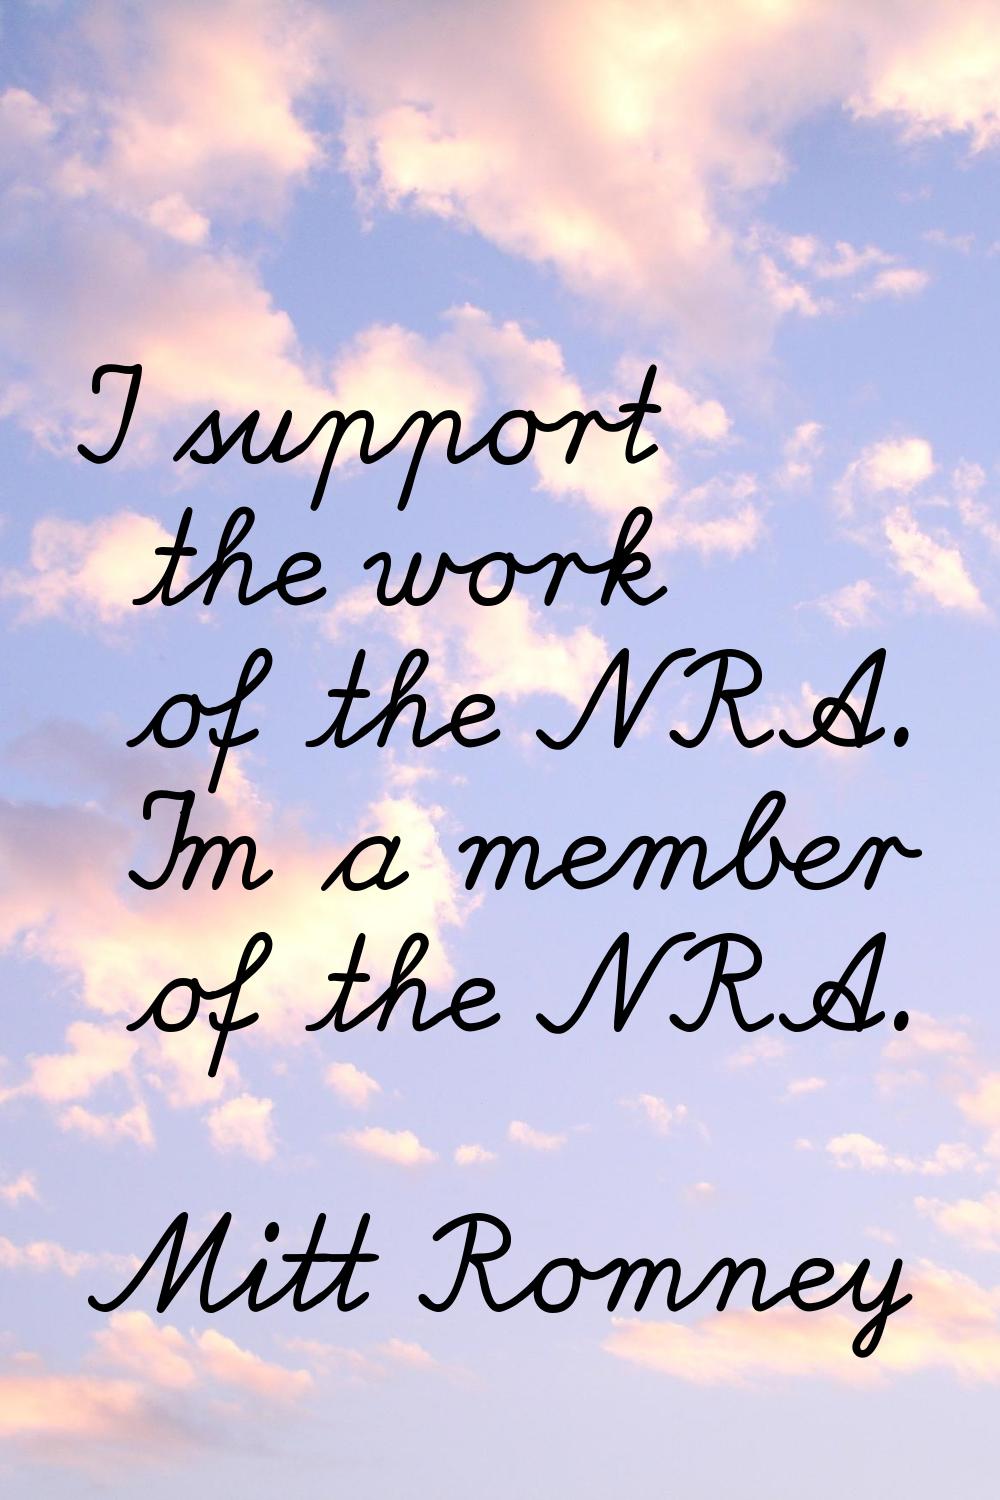 I support the work of the NRA. I'm a member of the NRA.